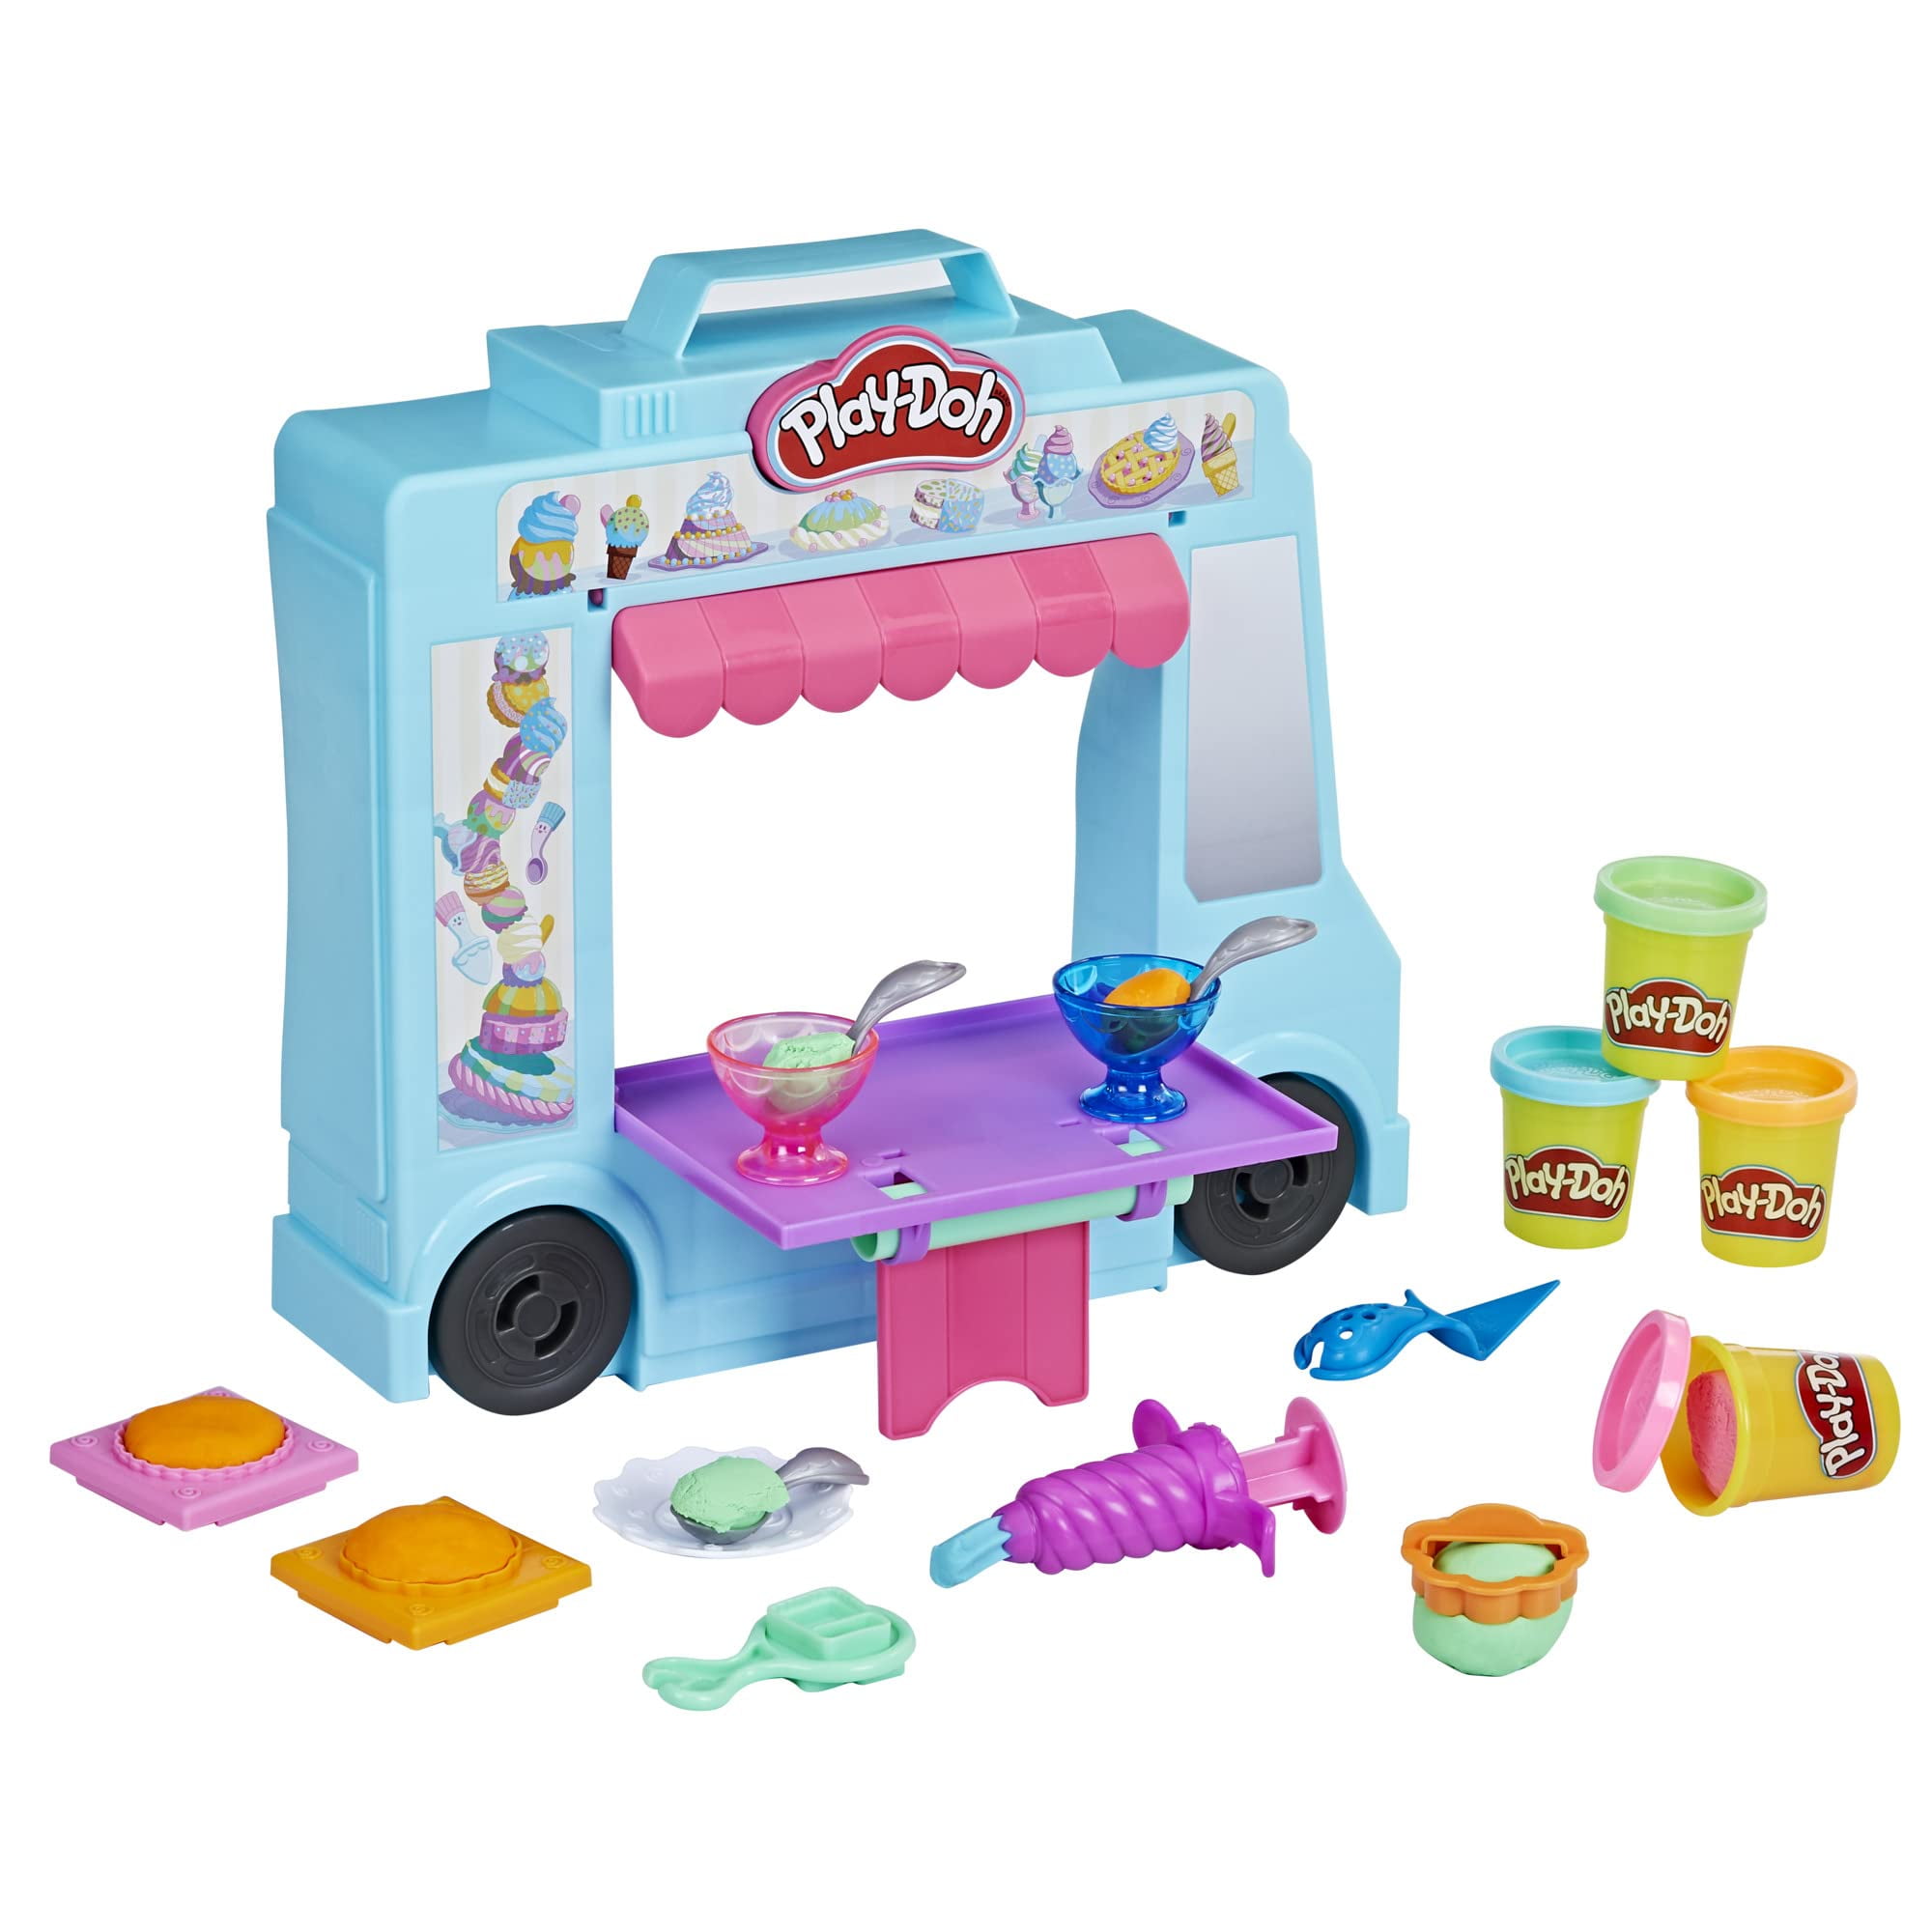 Play-Doh Ice Cream Truck Playset, Pretend Play Toy for Kids 3